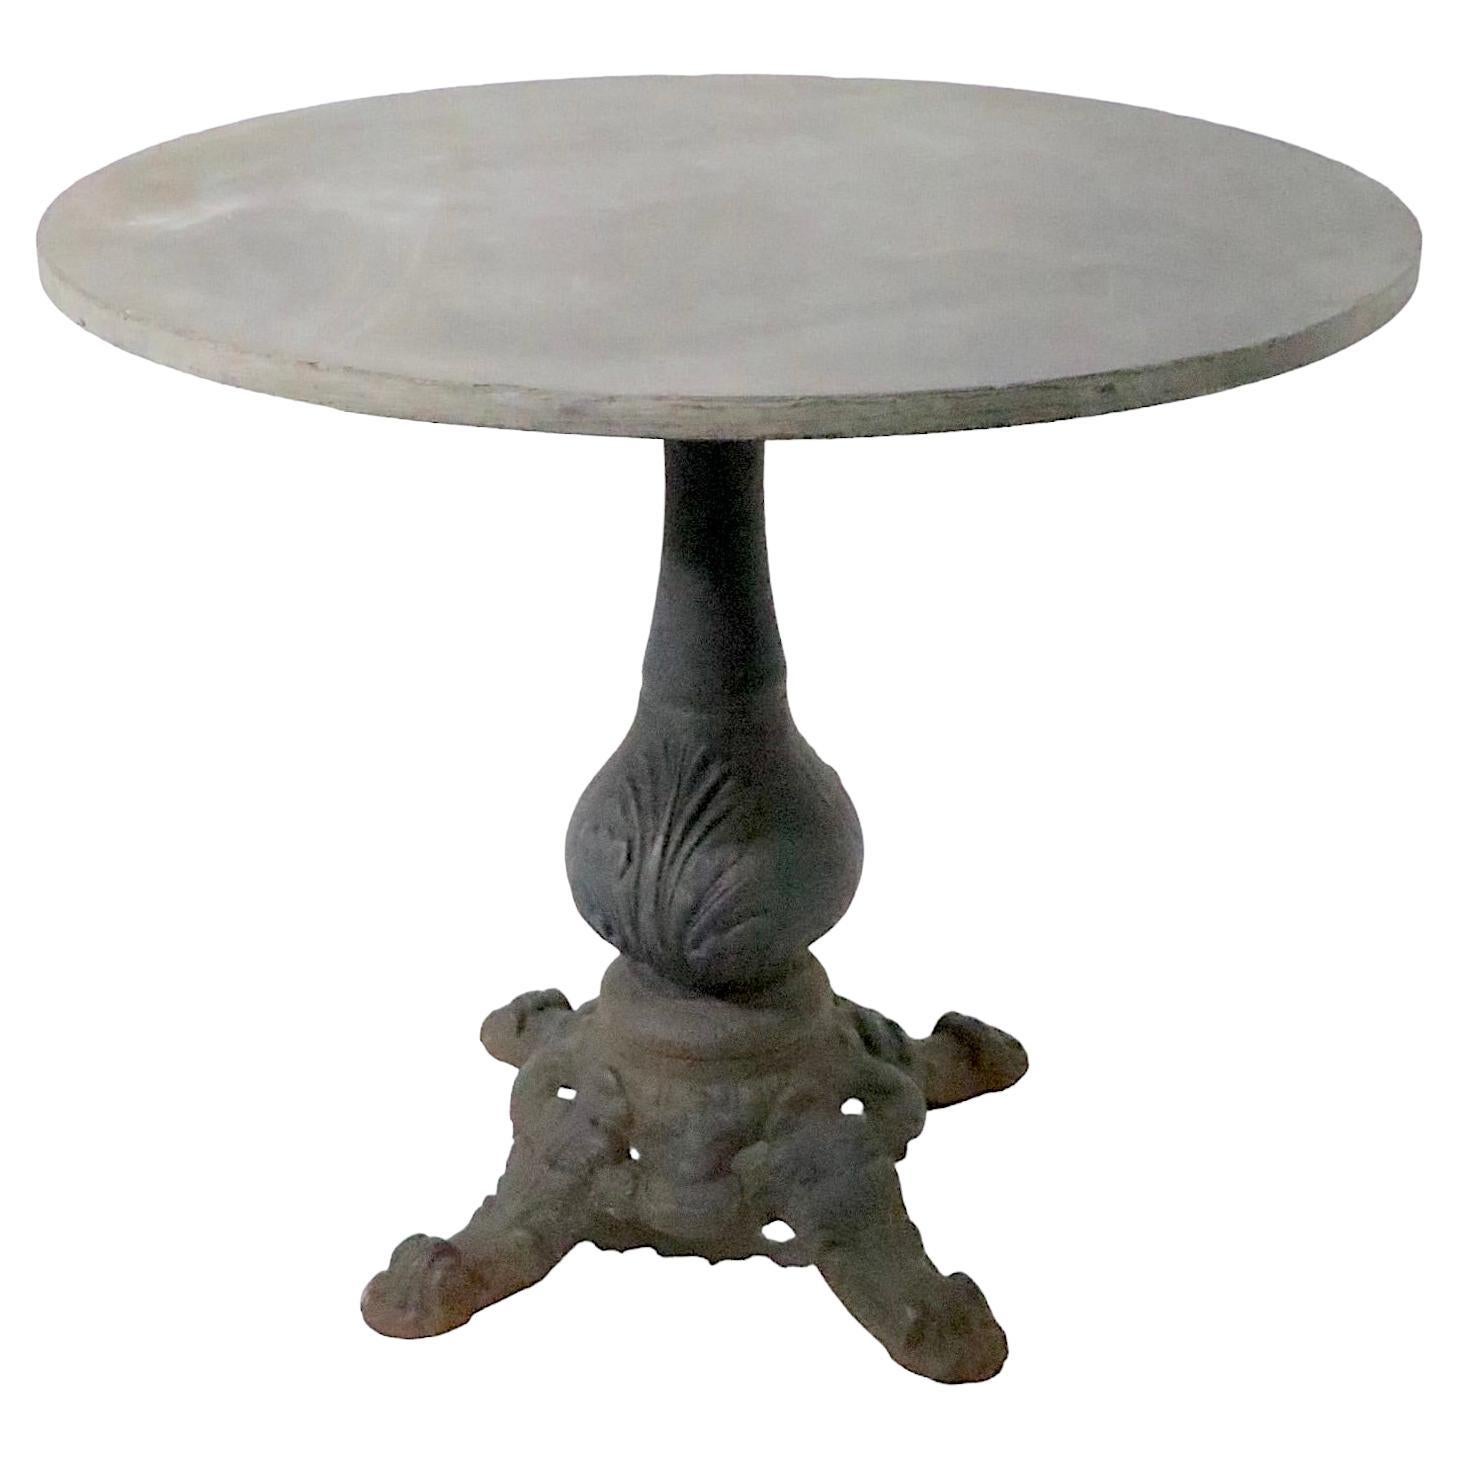 Granite Top Cast Iron Base French Style Cafe Bistro Garden Table c 1920 - 1950s For Sale